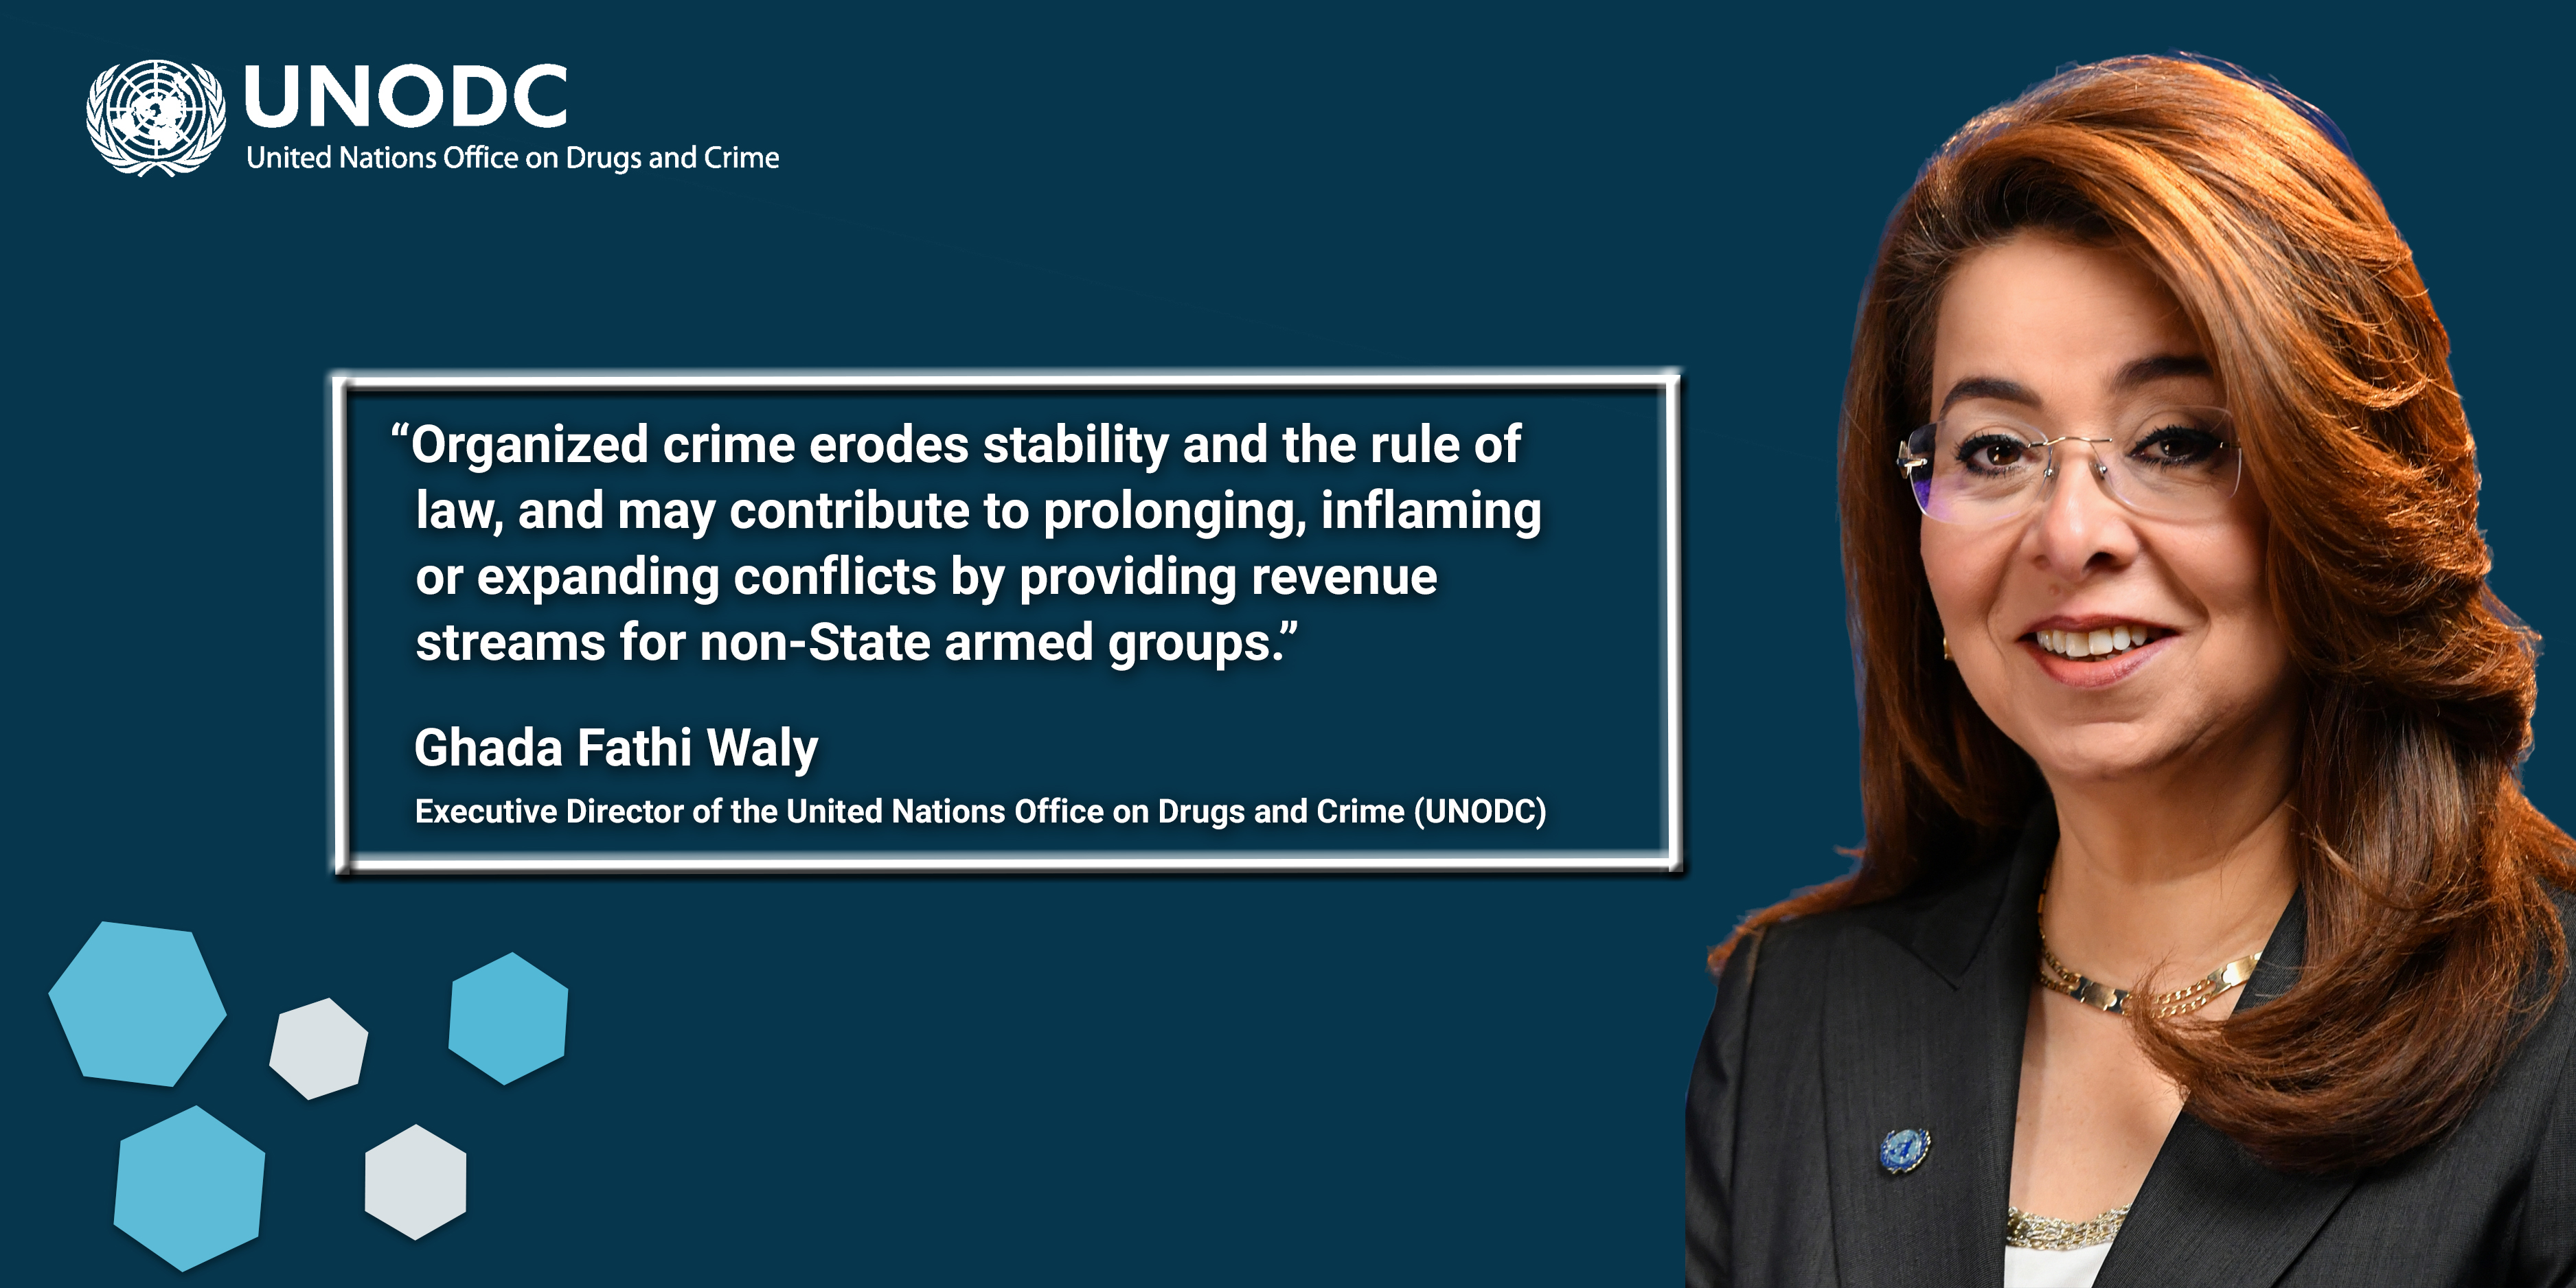 A visual with the logo of UNODC and an image of a woman smiling. The following text appears on the visual: "Organized crime erodes stability and the rule of law, and may contribute to prolonging, inflaming or expanding conflicts by providing revenue streams for non-State armed groups.” - Ghada Fathi Waly - Executive Director of the United Nations Office on Drugs and Crime (UNODC). Some visual elements appear as well - namely, hexagons of different colours.